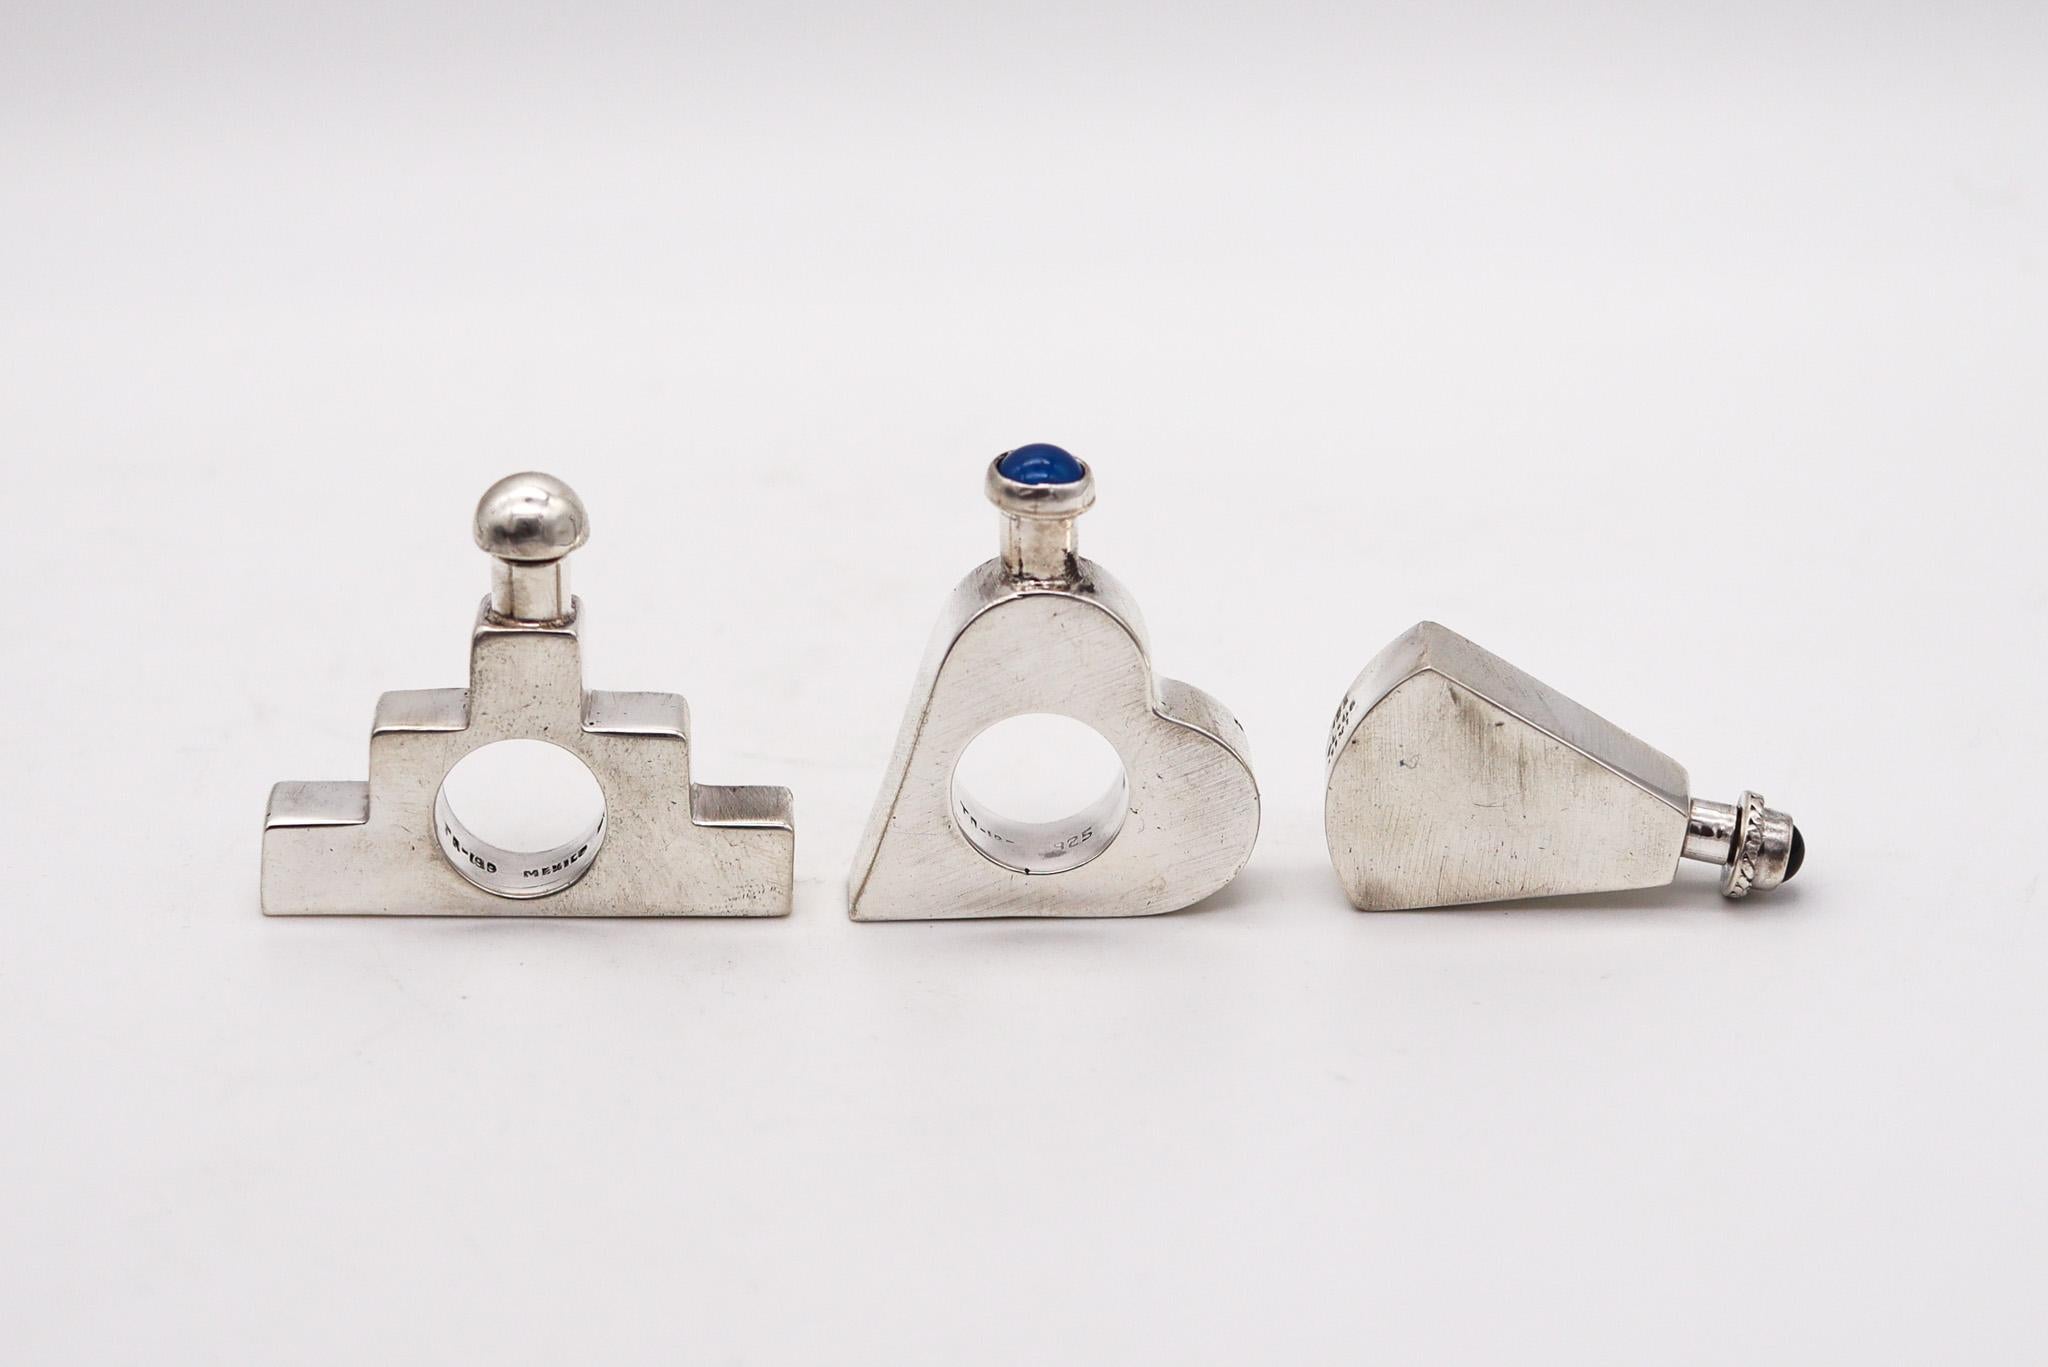 A group of retro modern perfume bottles in sterling silver.

Beautiful set of three perfume scent bottles, created in Taxco Mexico back in the 1970. They are very decorative bottles and one of a kind pieces, crafted with retro-modernist and